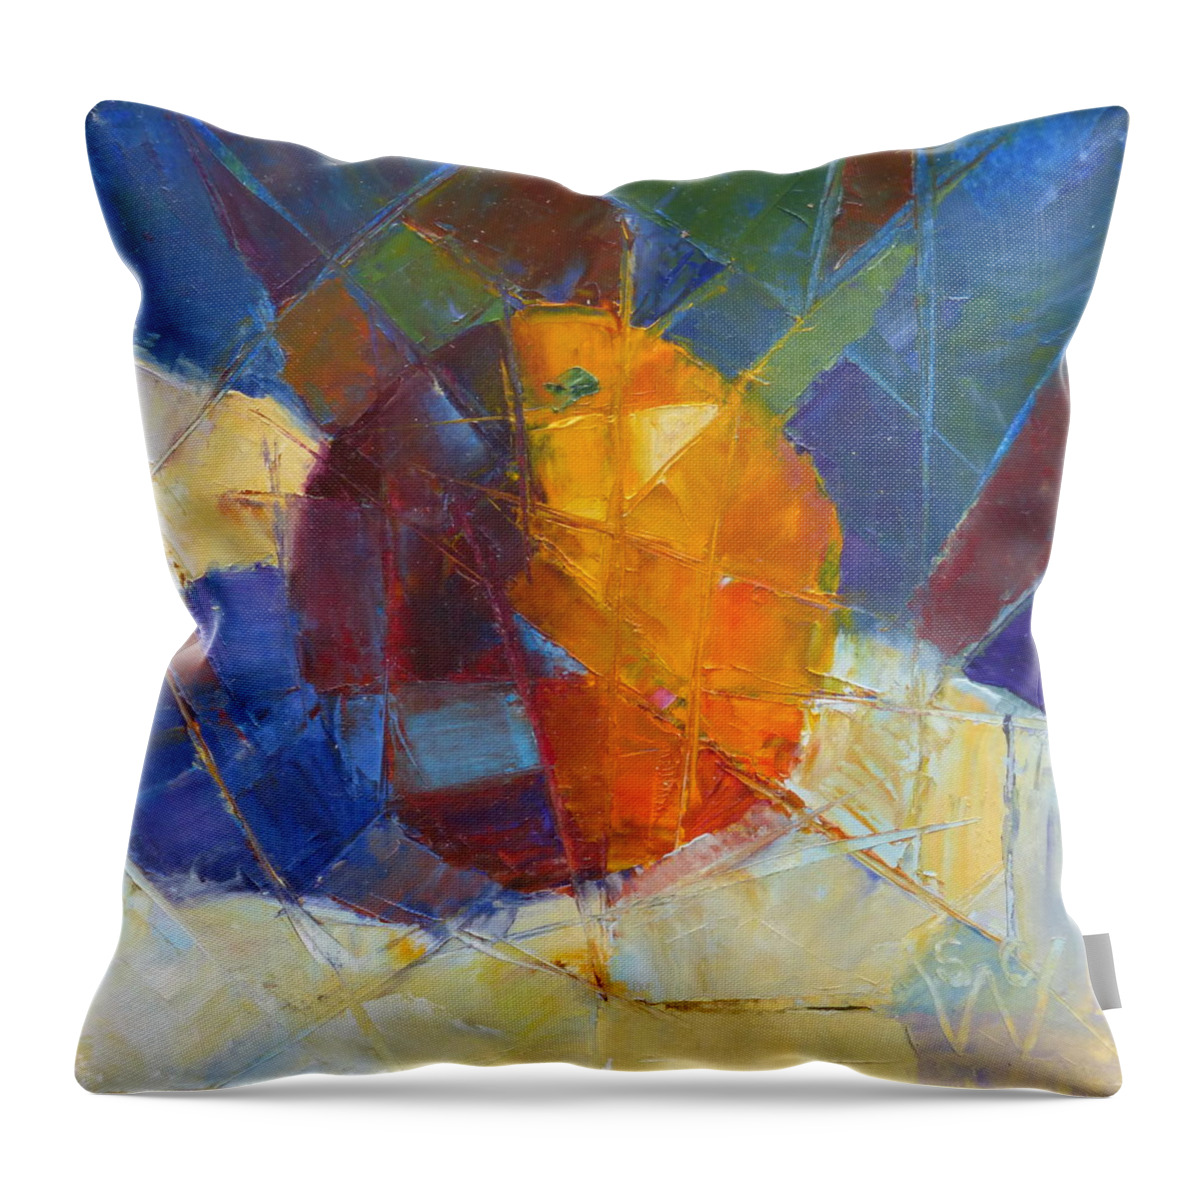 Orange Throw Pillow featuring the painting Fractured Orange by Susan Woodward